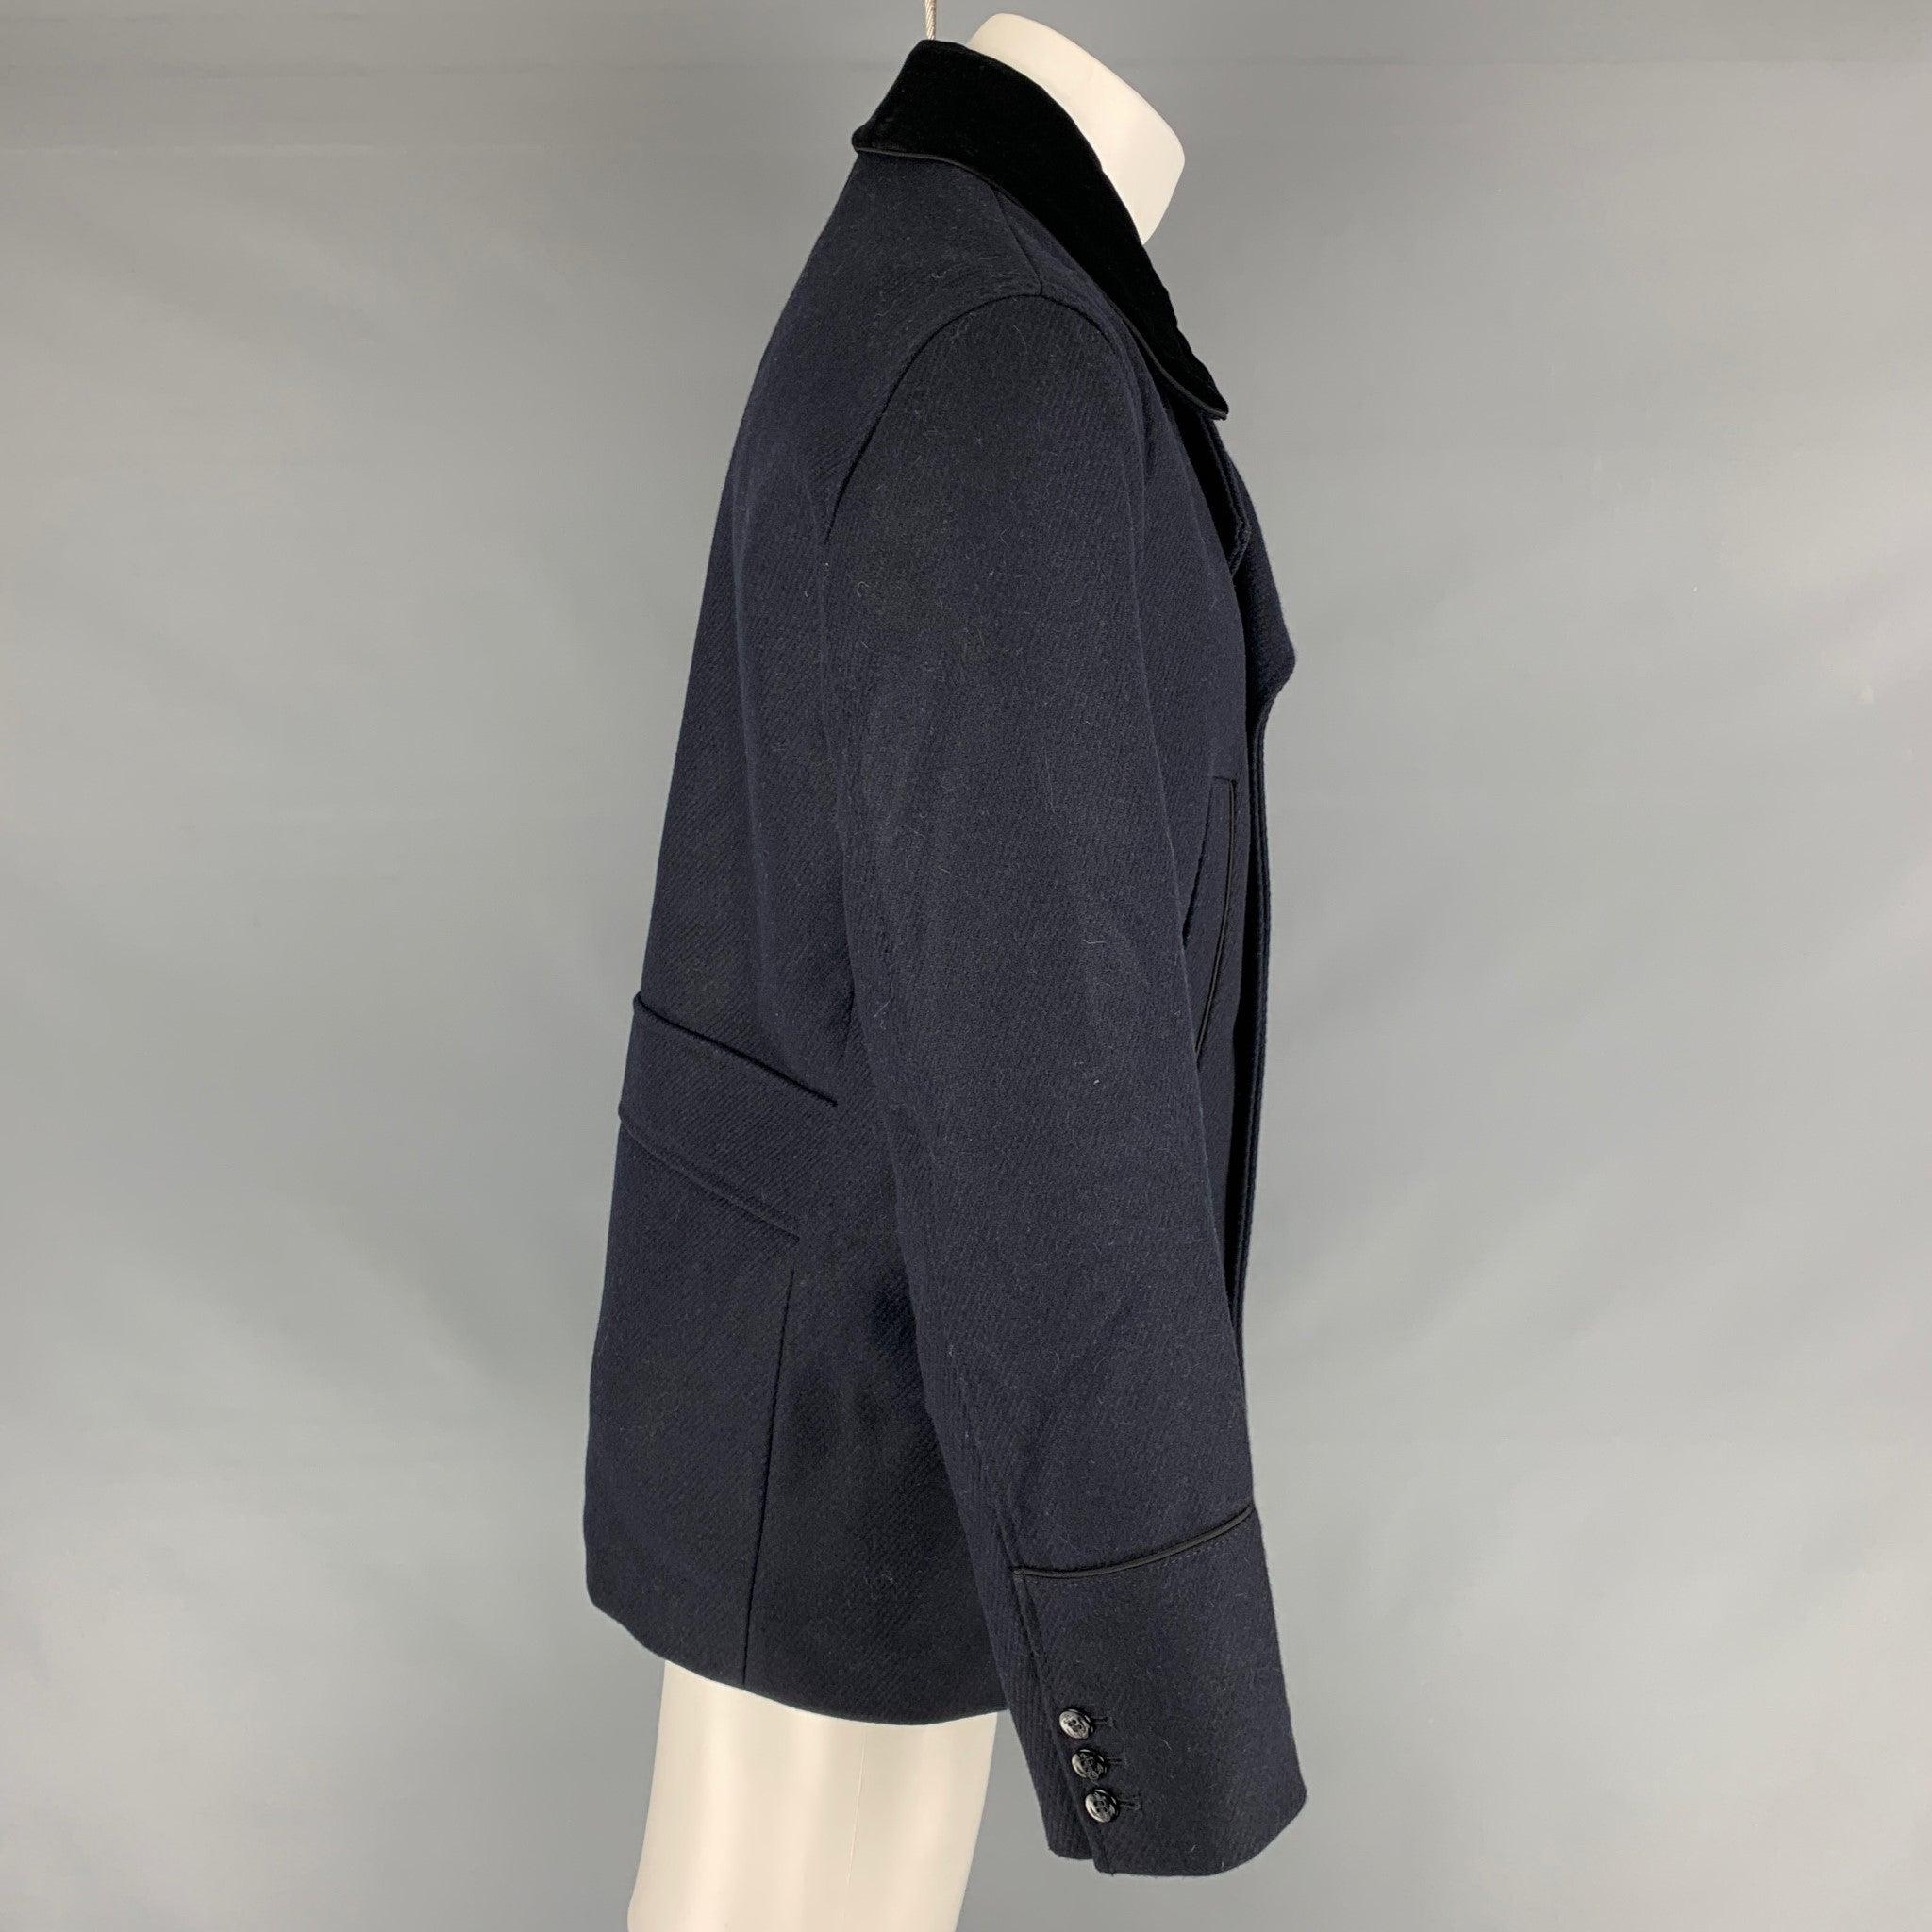 THE KOOPLES Size 40 Navy Solid Wool Blend Peacoat Coat For Sale 1